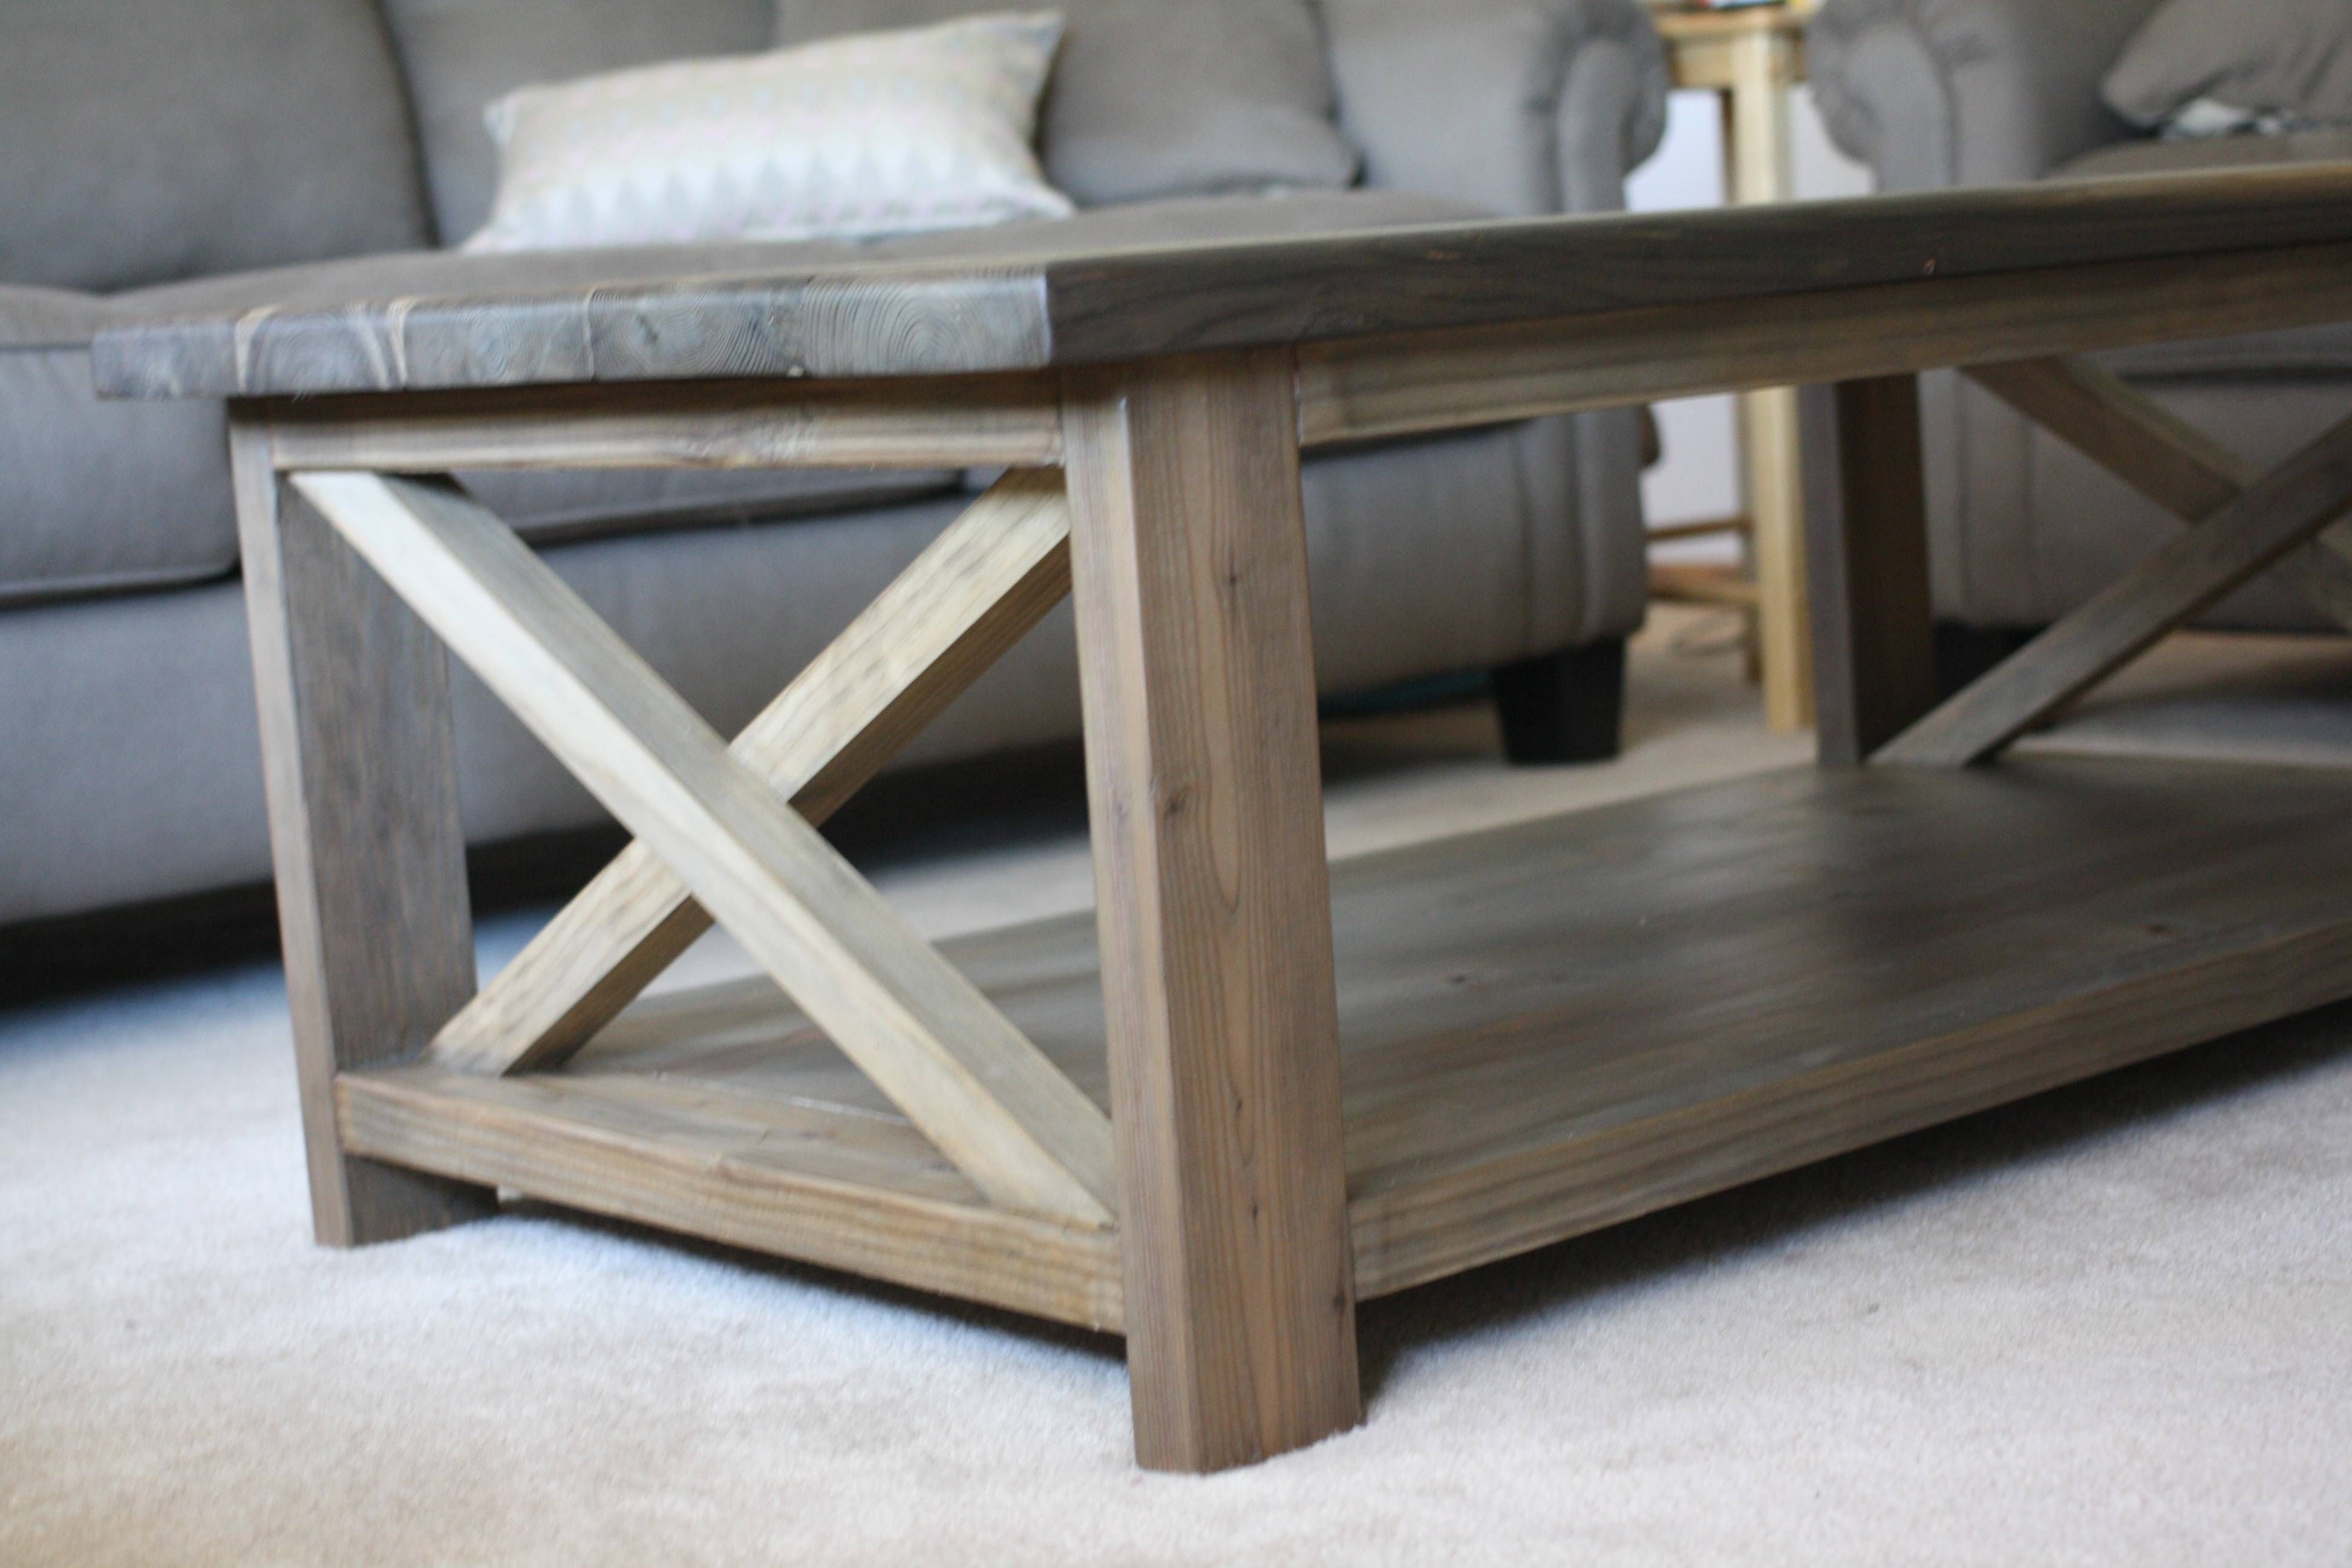 Delighful Rustic Coffee Tables Table L With Inspiration With Regard To Rustic Coffee Tables (View 1 of 14)